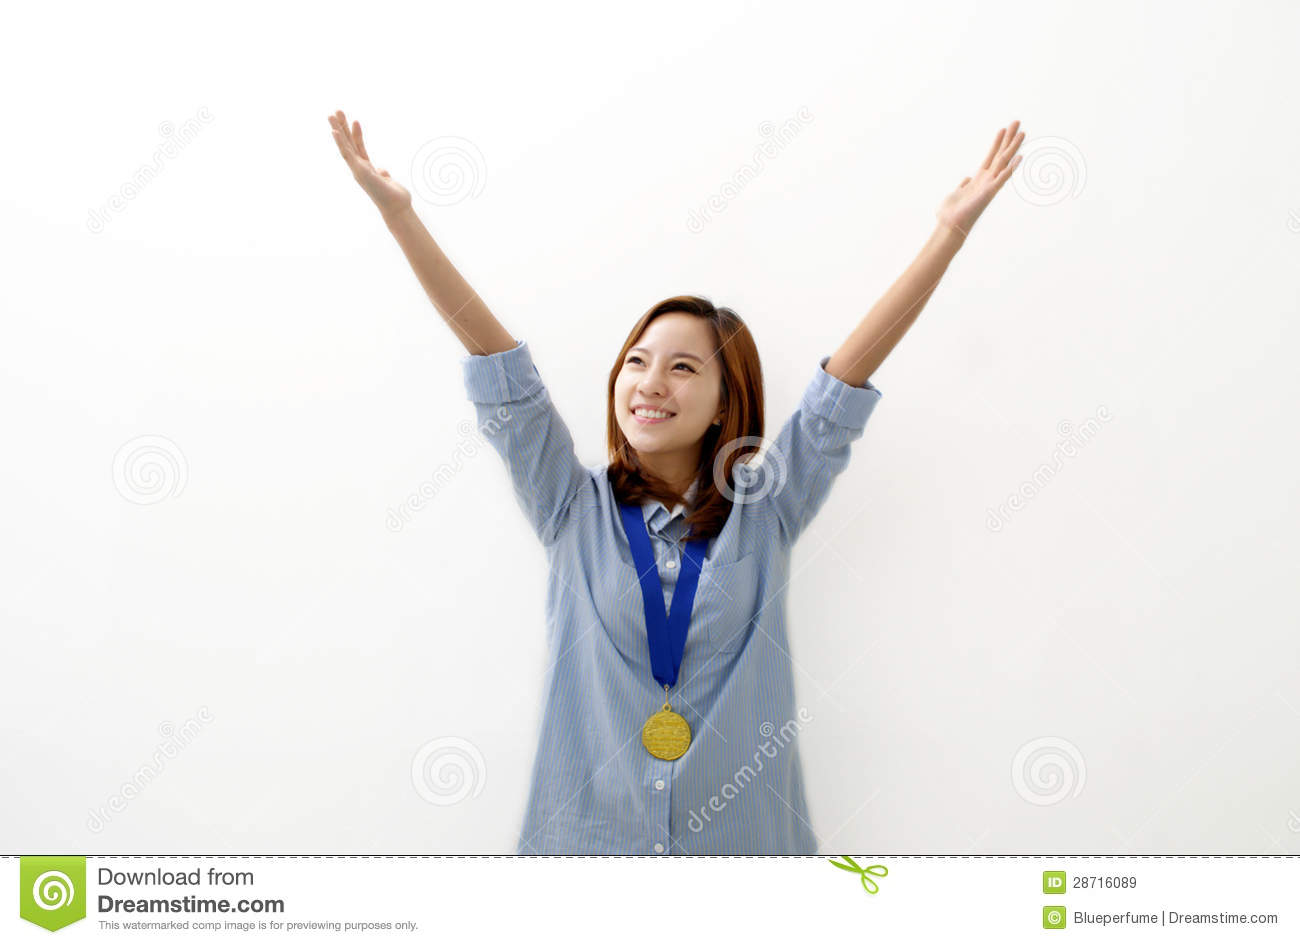     Woman Happily Holds Up Her Arms With A Gold Medal Around Her Neck